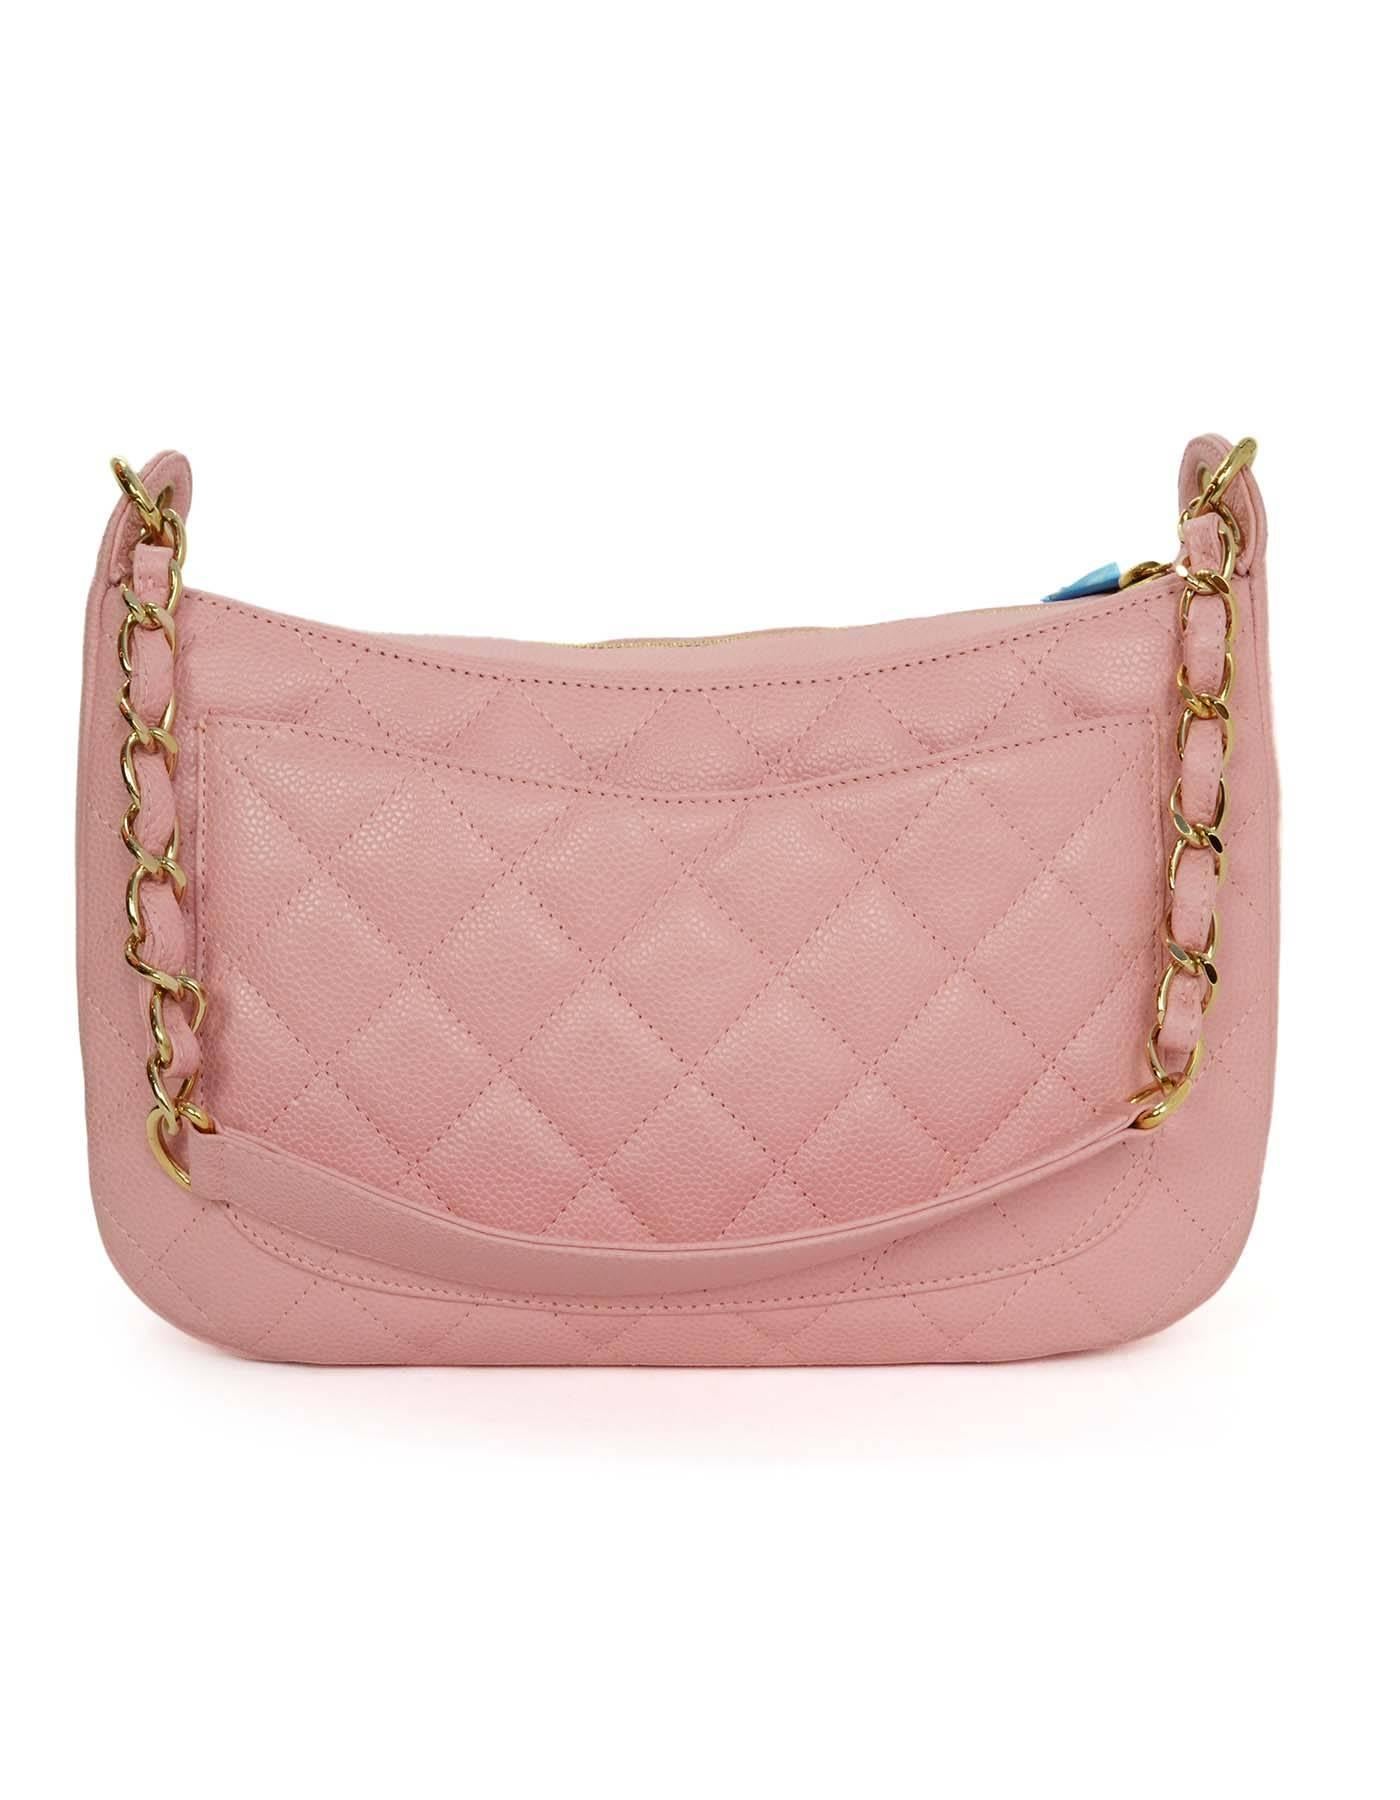 Chanel Pink Caviar Timeless CC Bag 
Features quilting throughout and Timeless CC stitched on front panel of bag
Made In: Italy
Year of Production: 2003-2004
Color: Pink
Hardware: Goldtone
Materials: Caviar leather
Lining: Tan